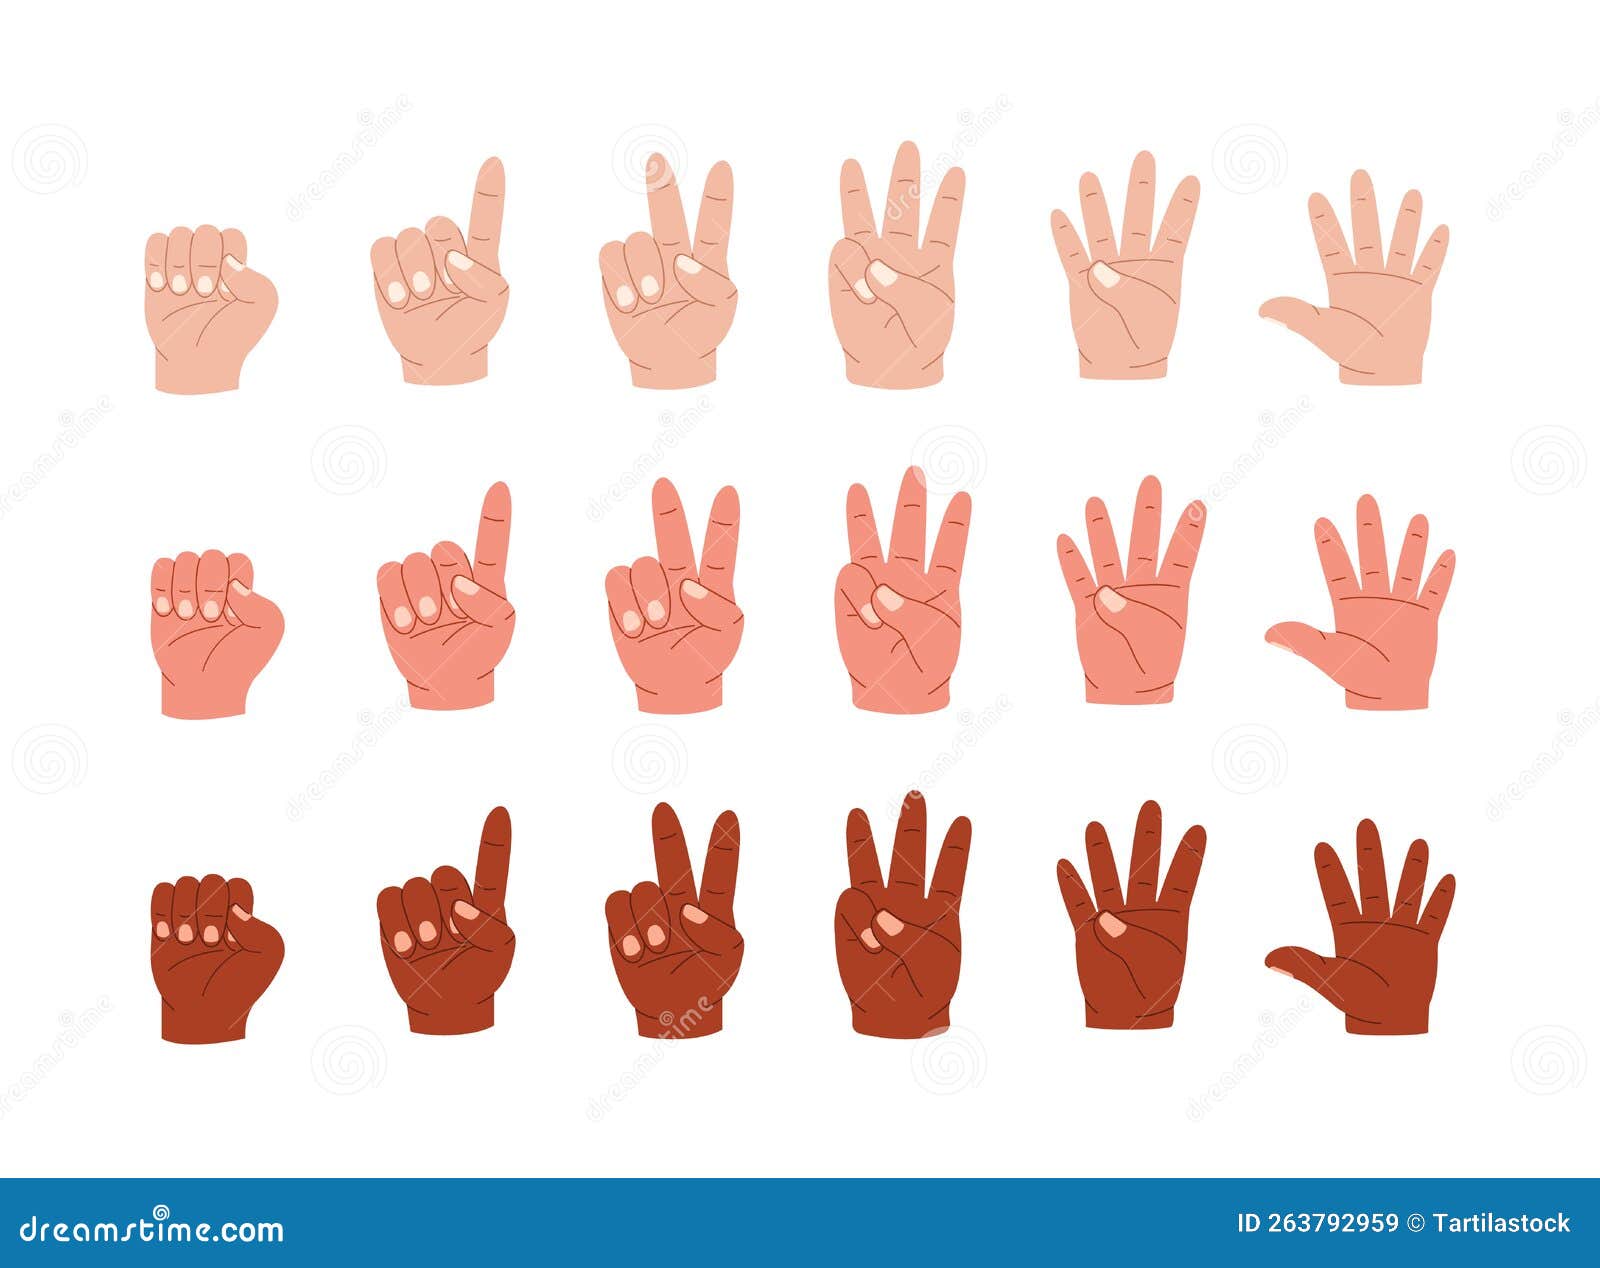 Hands Count. Cartoon Multiracial Human Palm Gestures Showing Numbers by ...